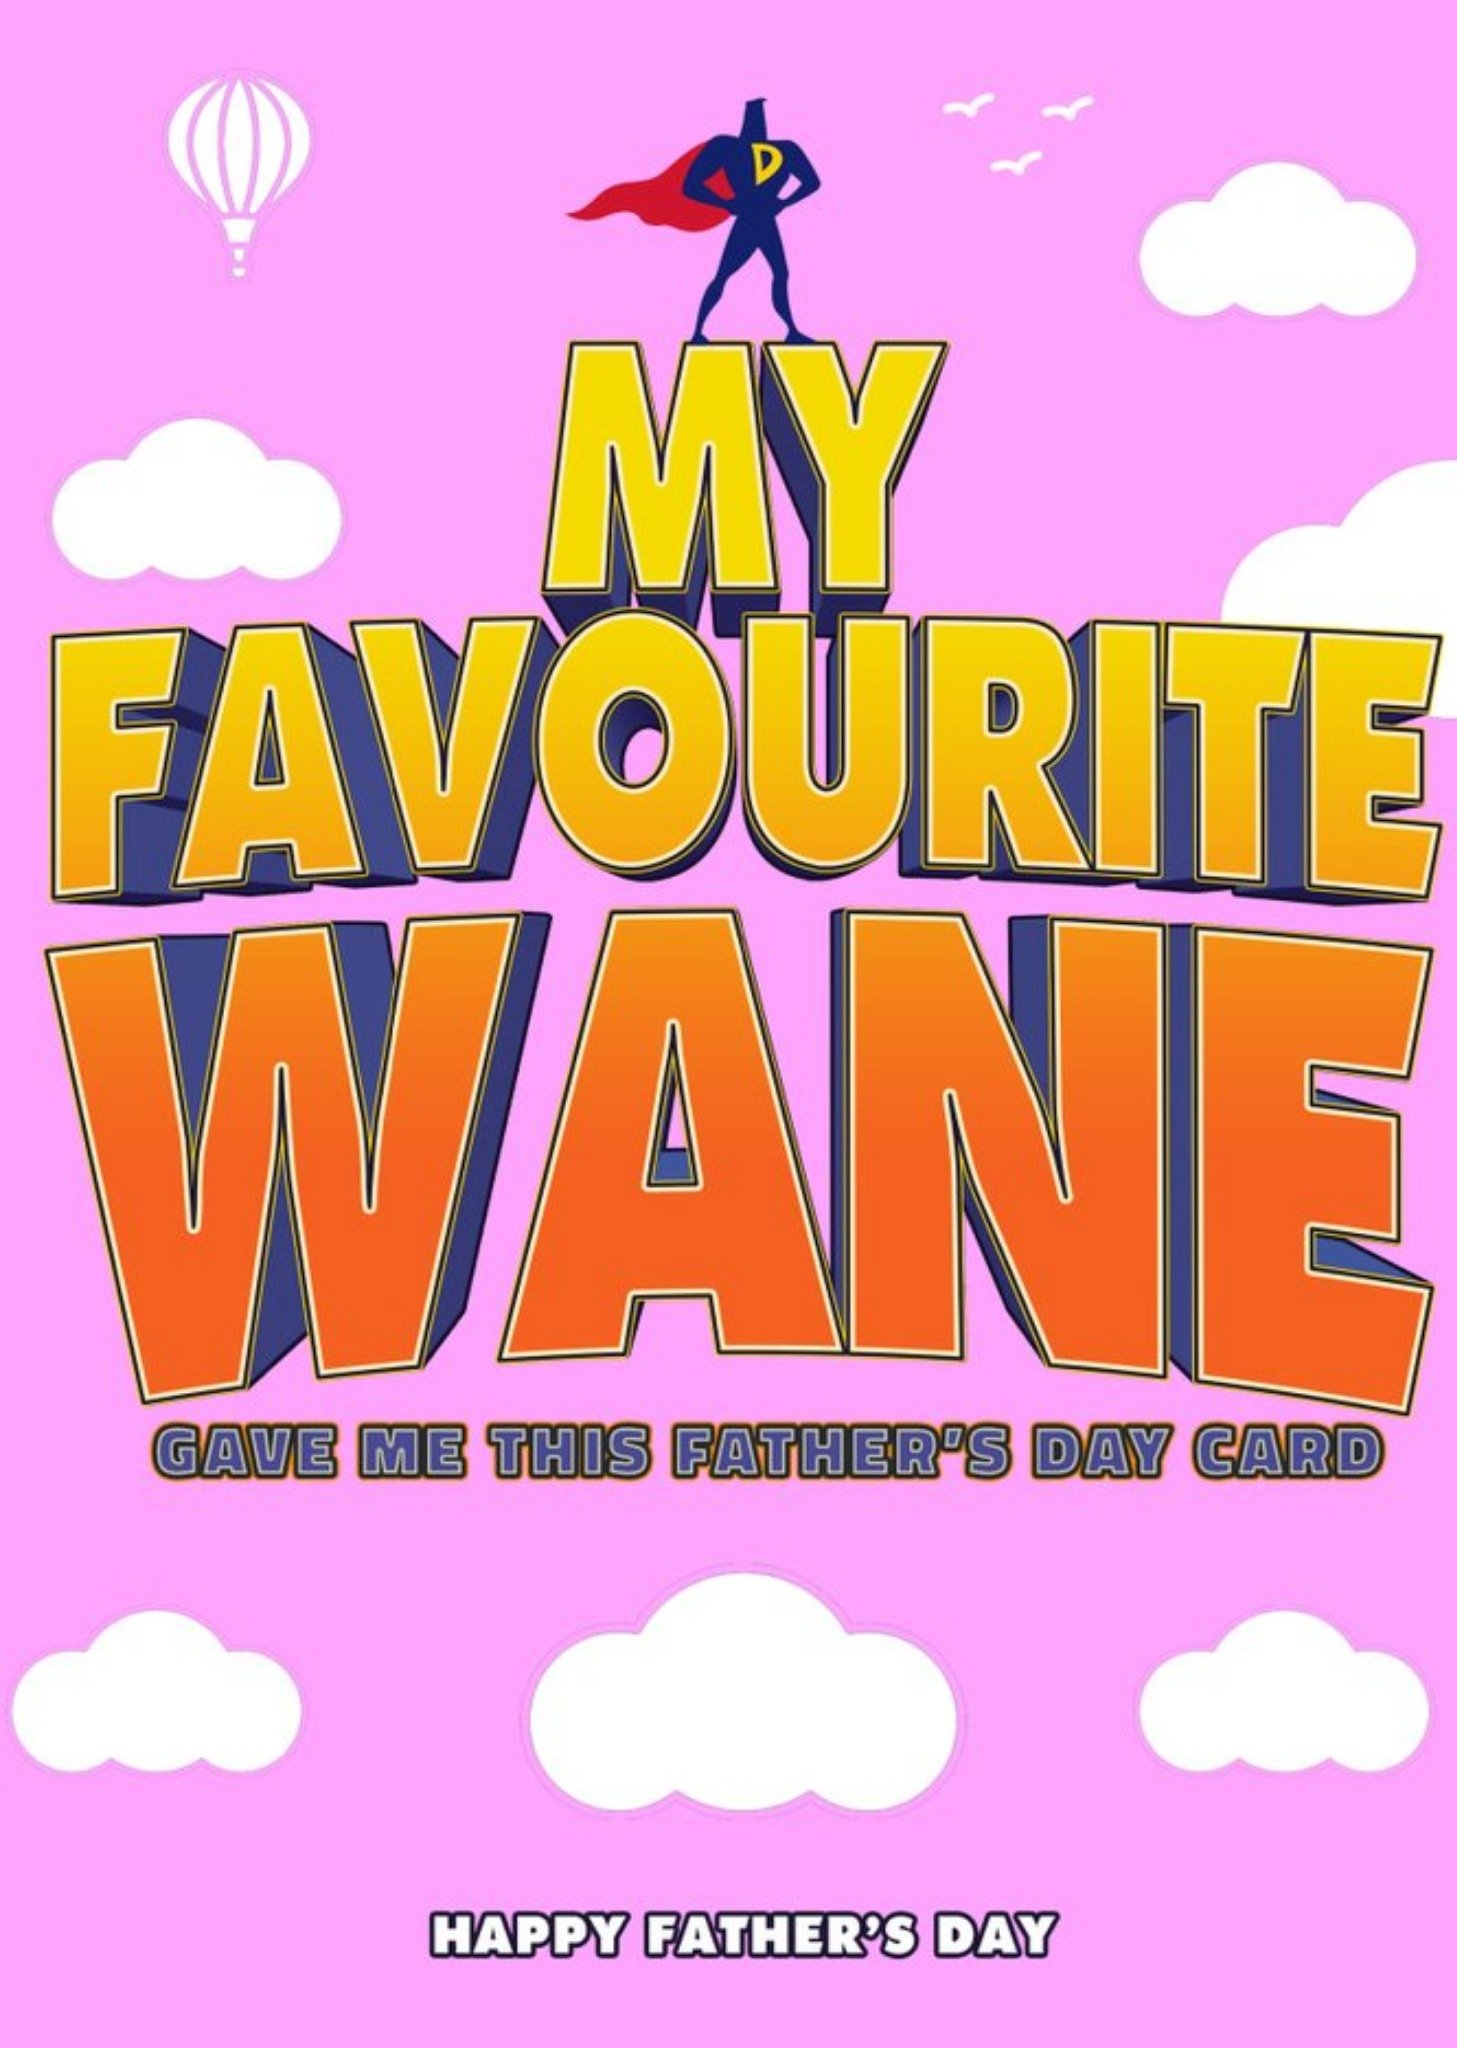 Moonpig Ferry Clever Funny Favourite Wane Illustrated Superhero Father's Day Card, Large